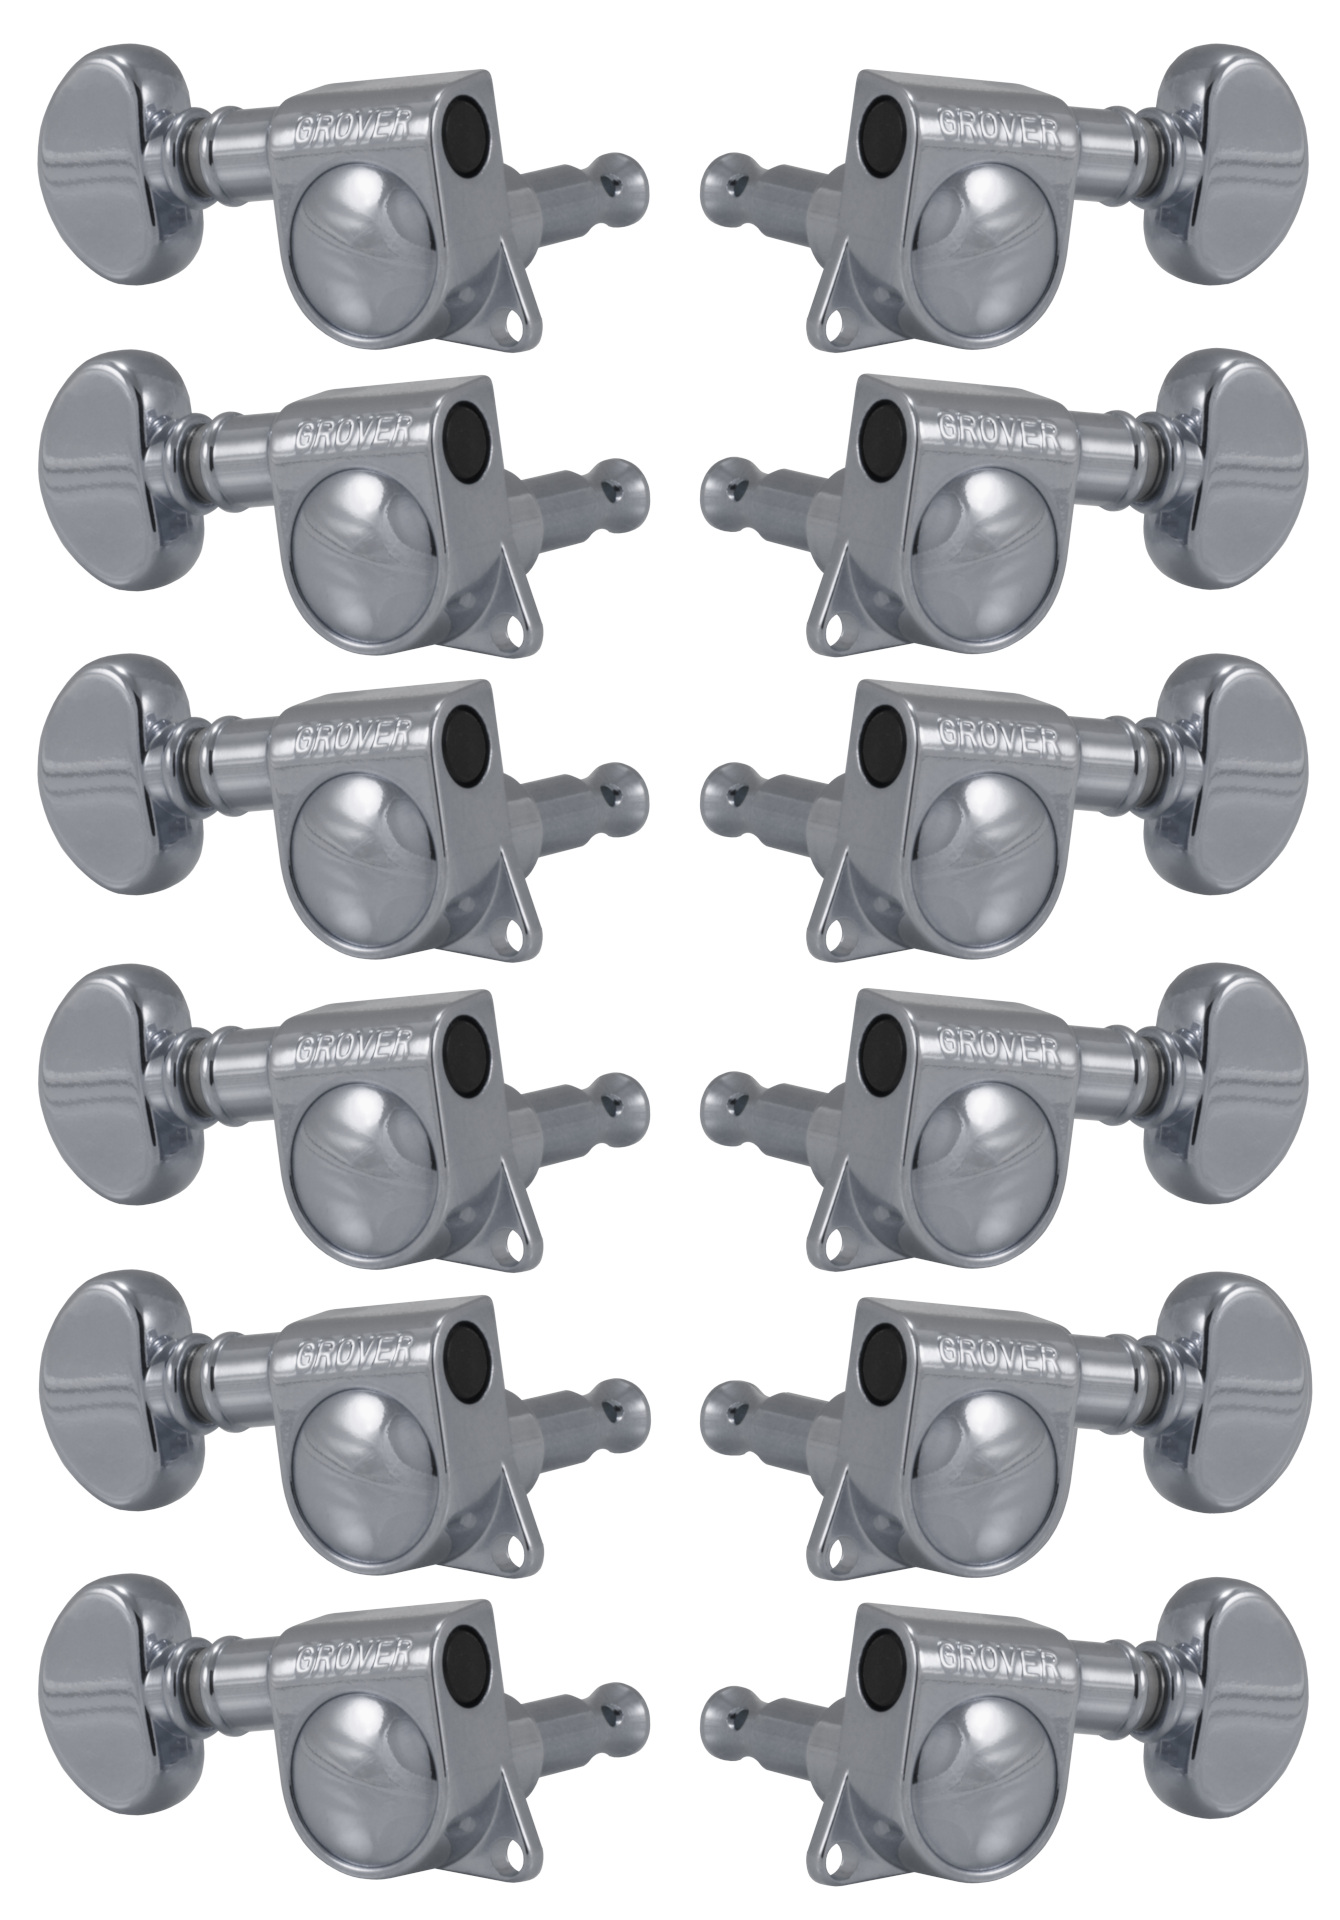 Grover 305C12 Mid-Size Rotomatics with Round Button - 12-String Guitar Machine Heads, 6 + 6 - Chrome